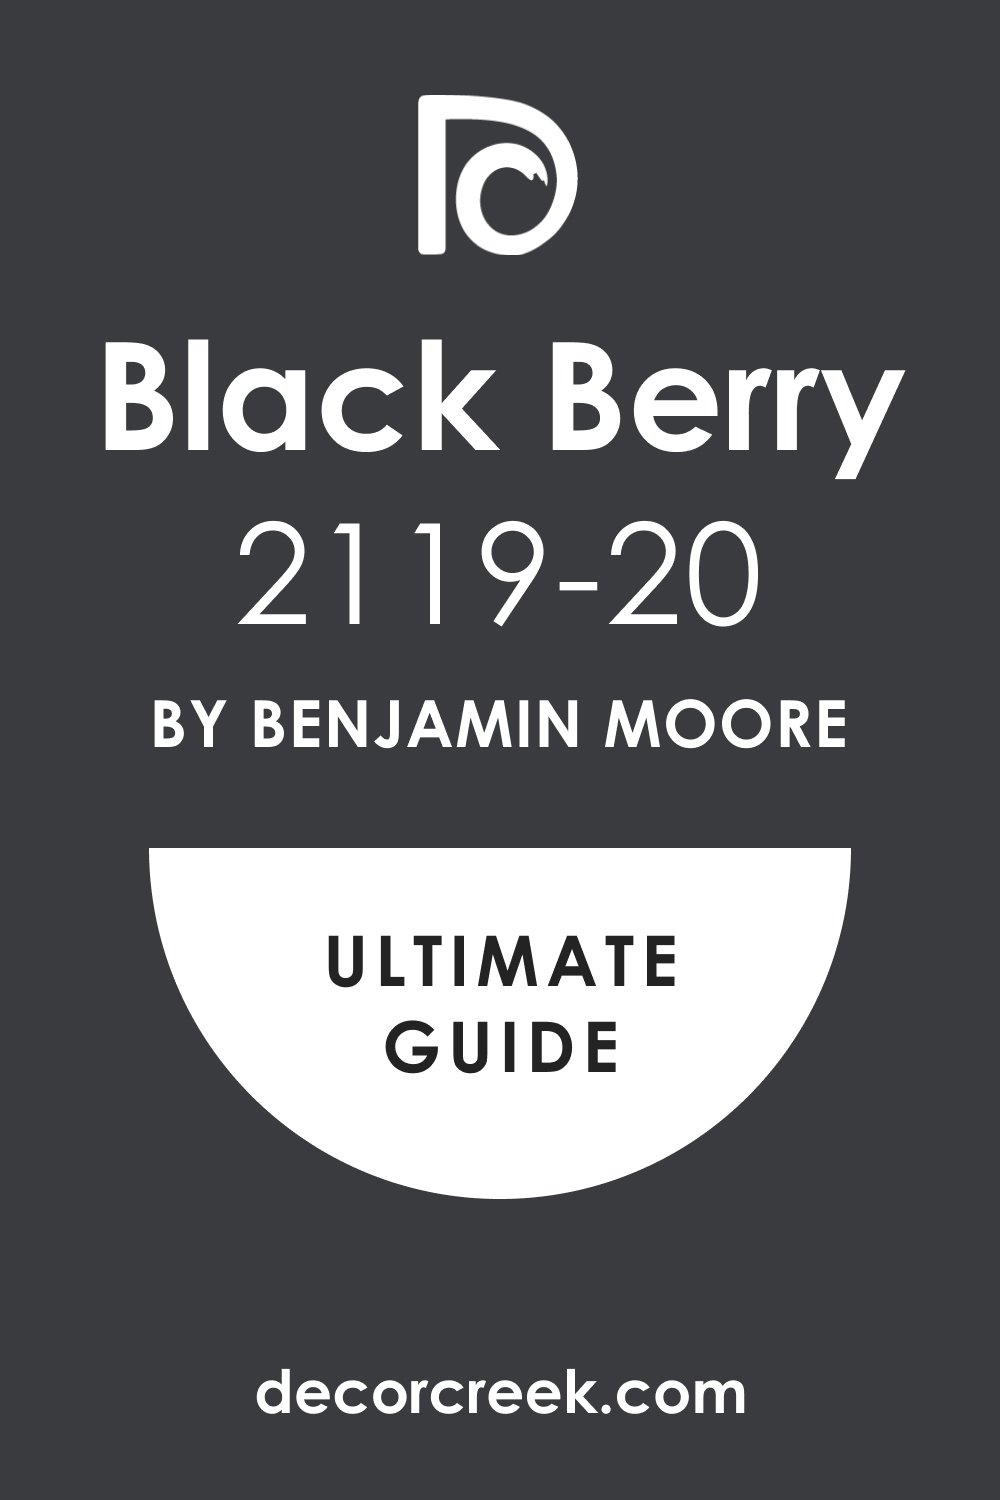 Ultimate guide of Black Berry 2119-20 